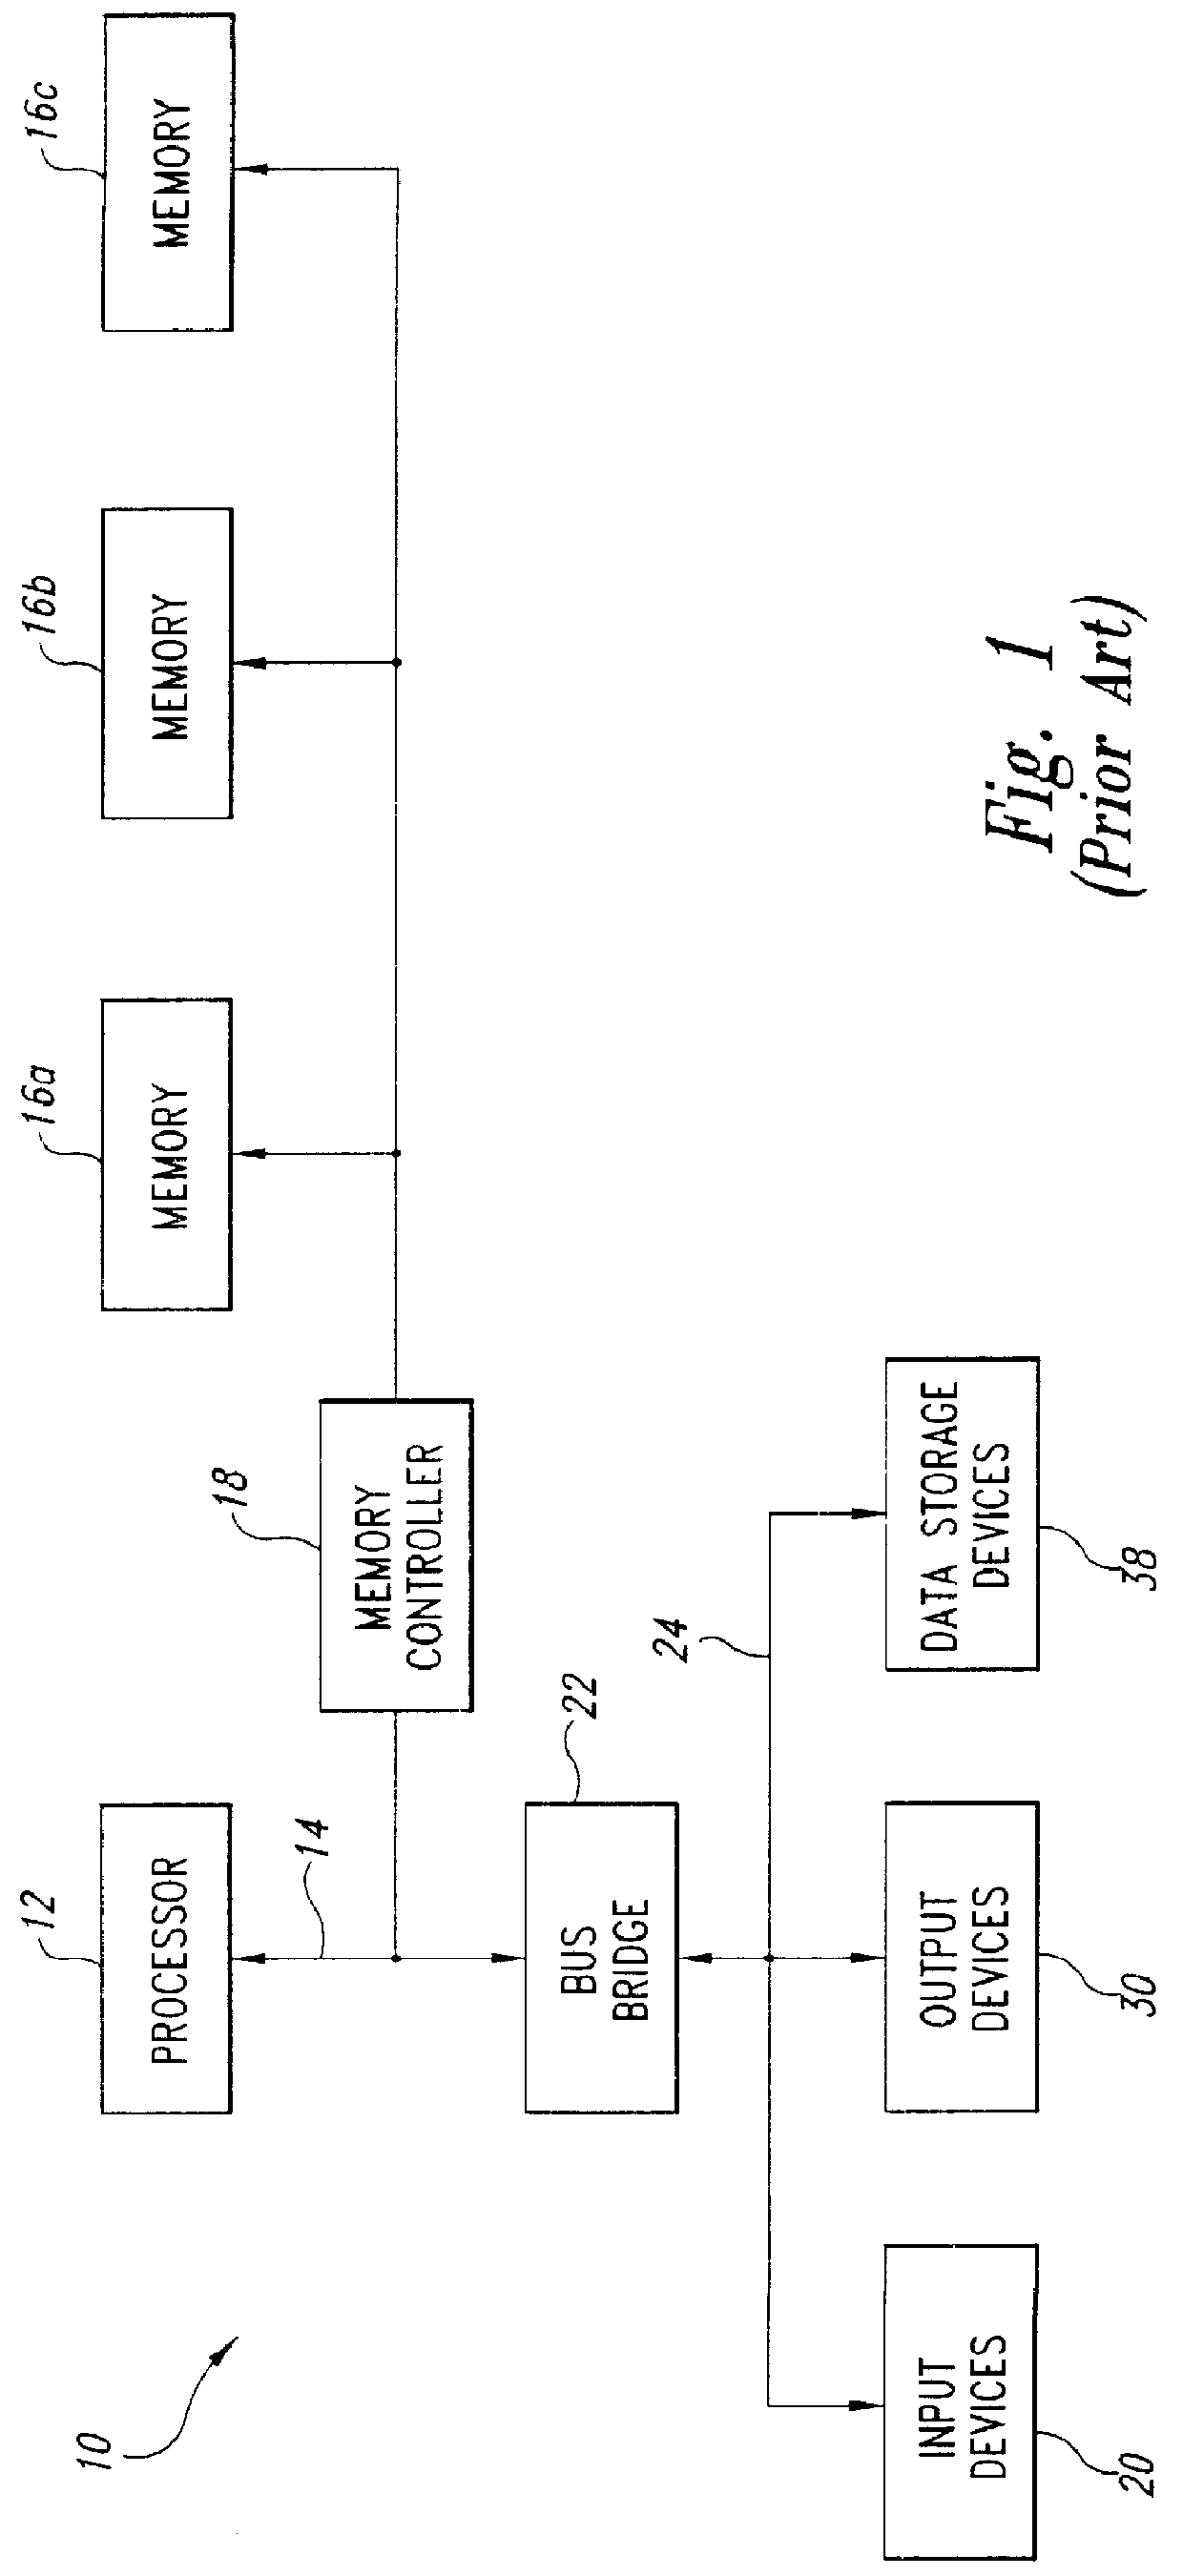 Method and apparatus for detecting an initialization signal and a command packet error in packetized dynamic random access memories